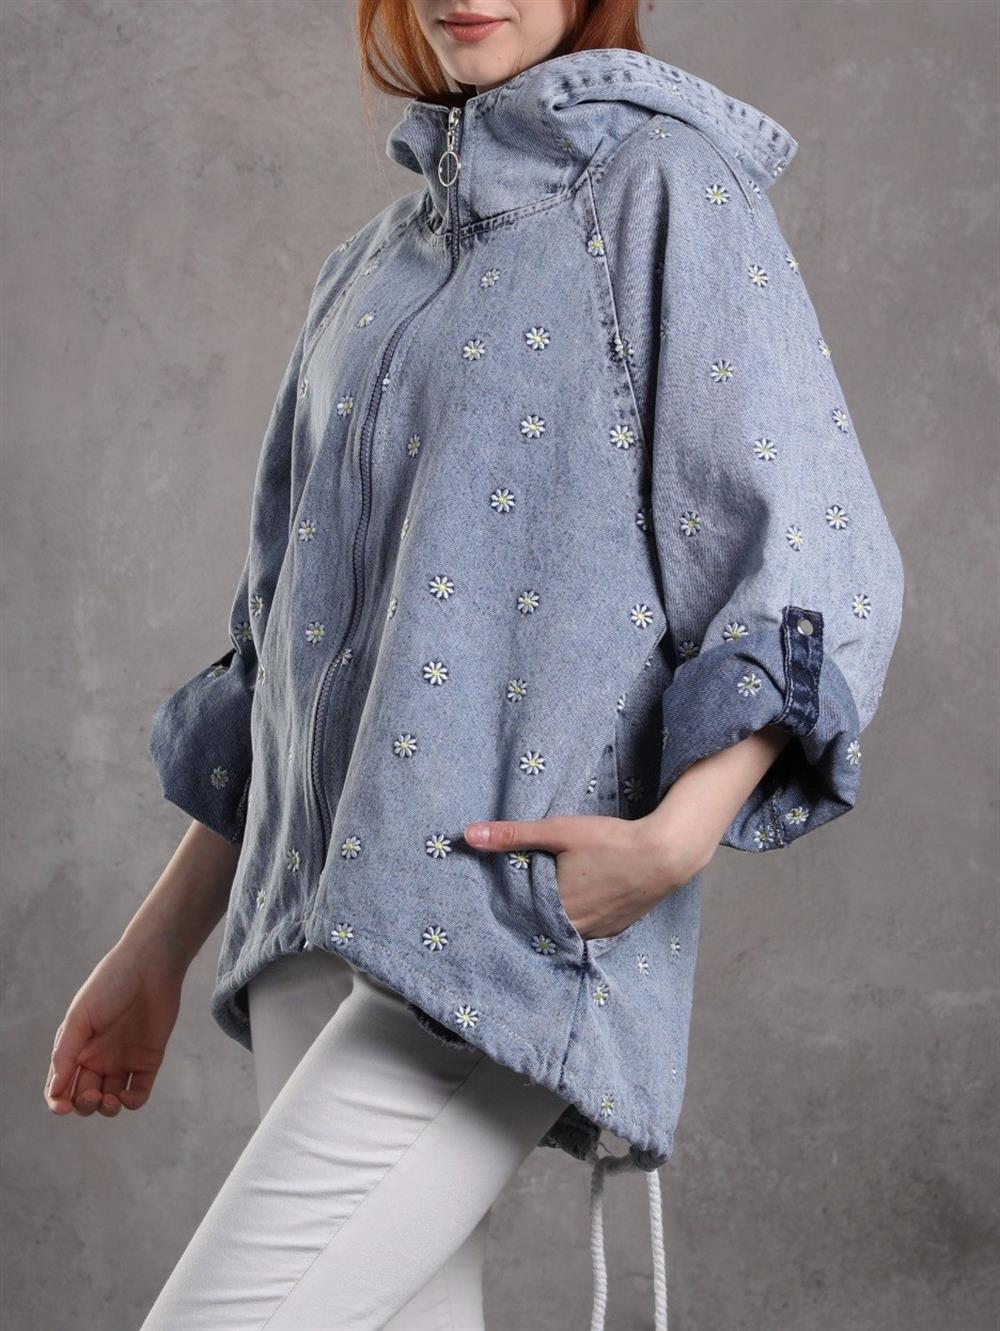 Constant Hooded Daisy Embroidered Zipped Jeans Jacket -Buz Blue